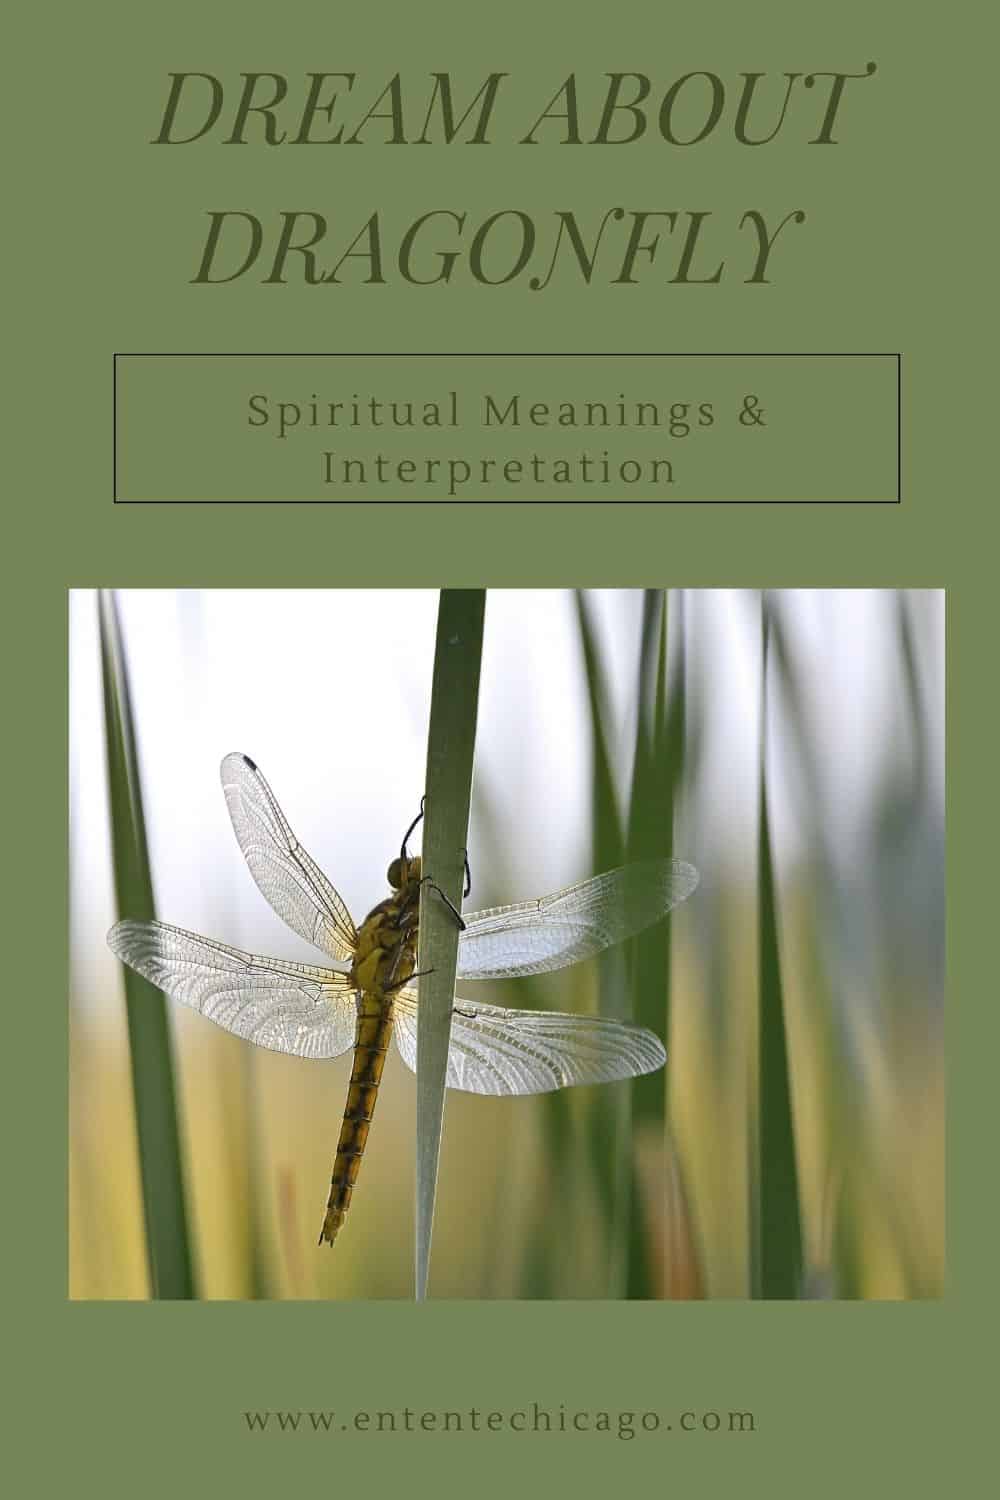 Dream About Dragonfly (Spiritual Meanings & Interpretation)